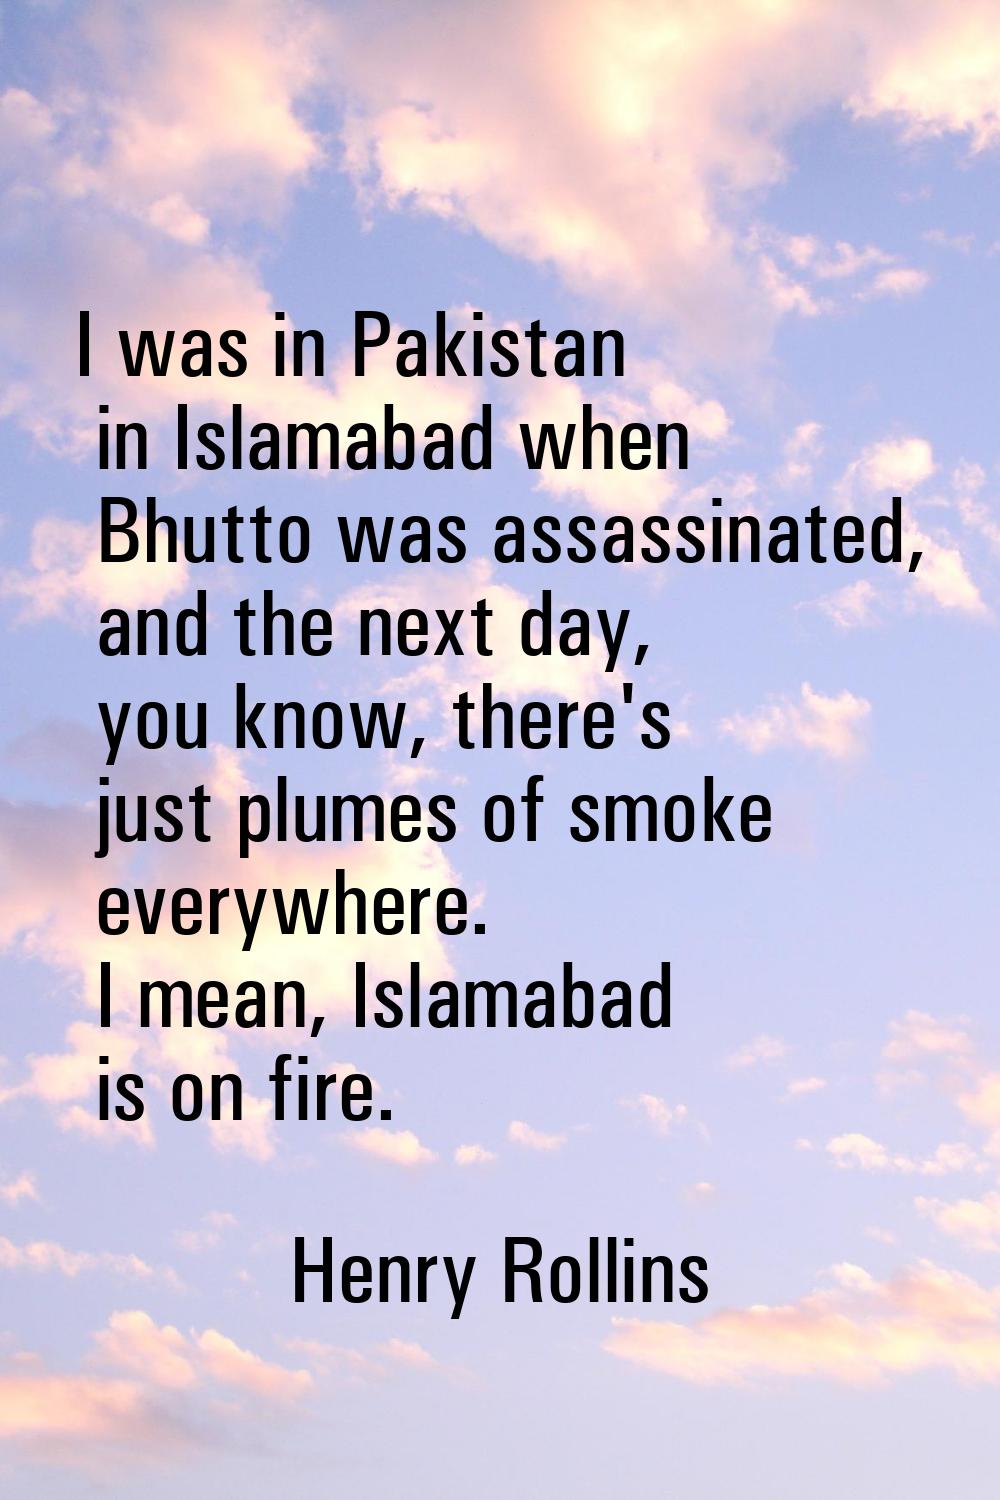 I was in Pakistan in Islamabad when Bhutto was assassinated, and the next day, you know, there's ju